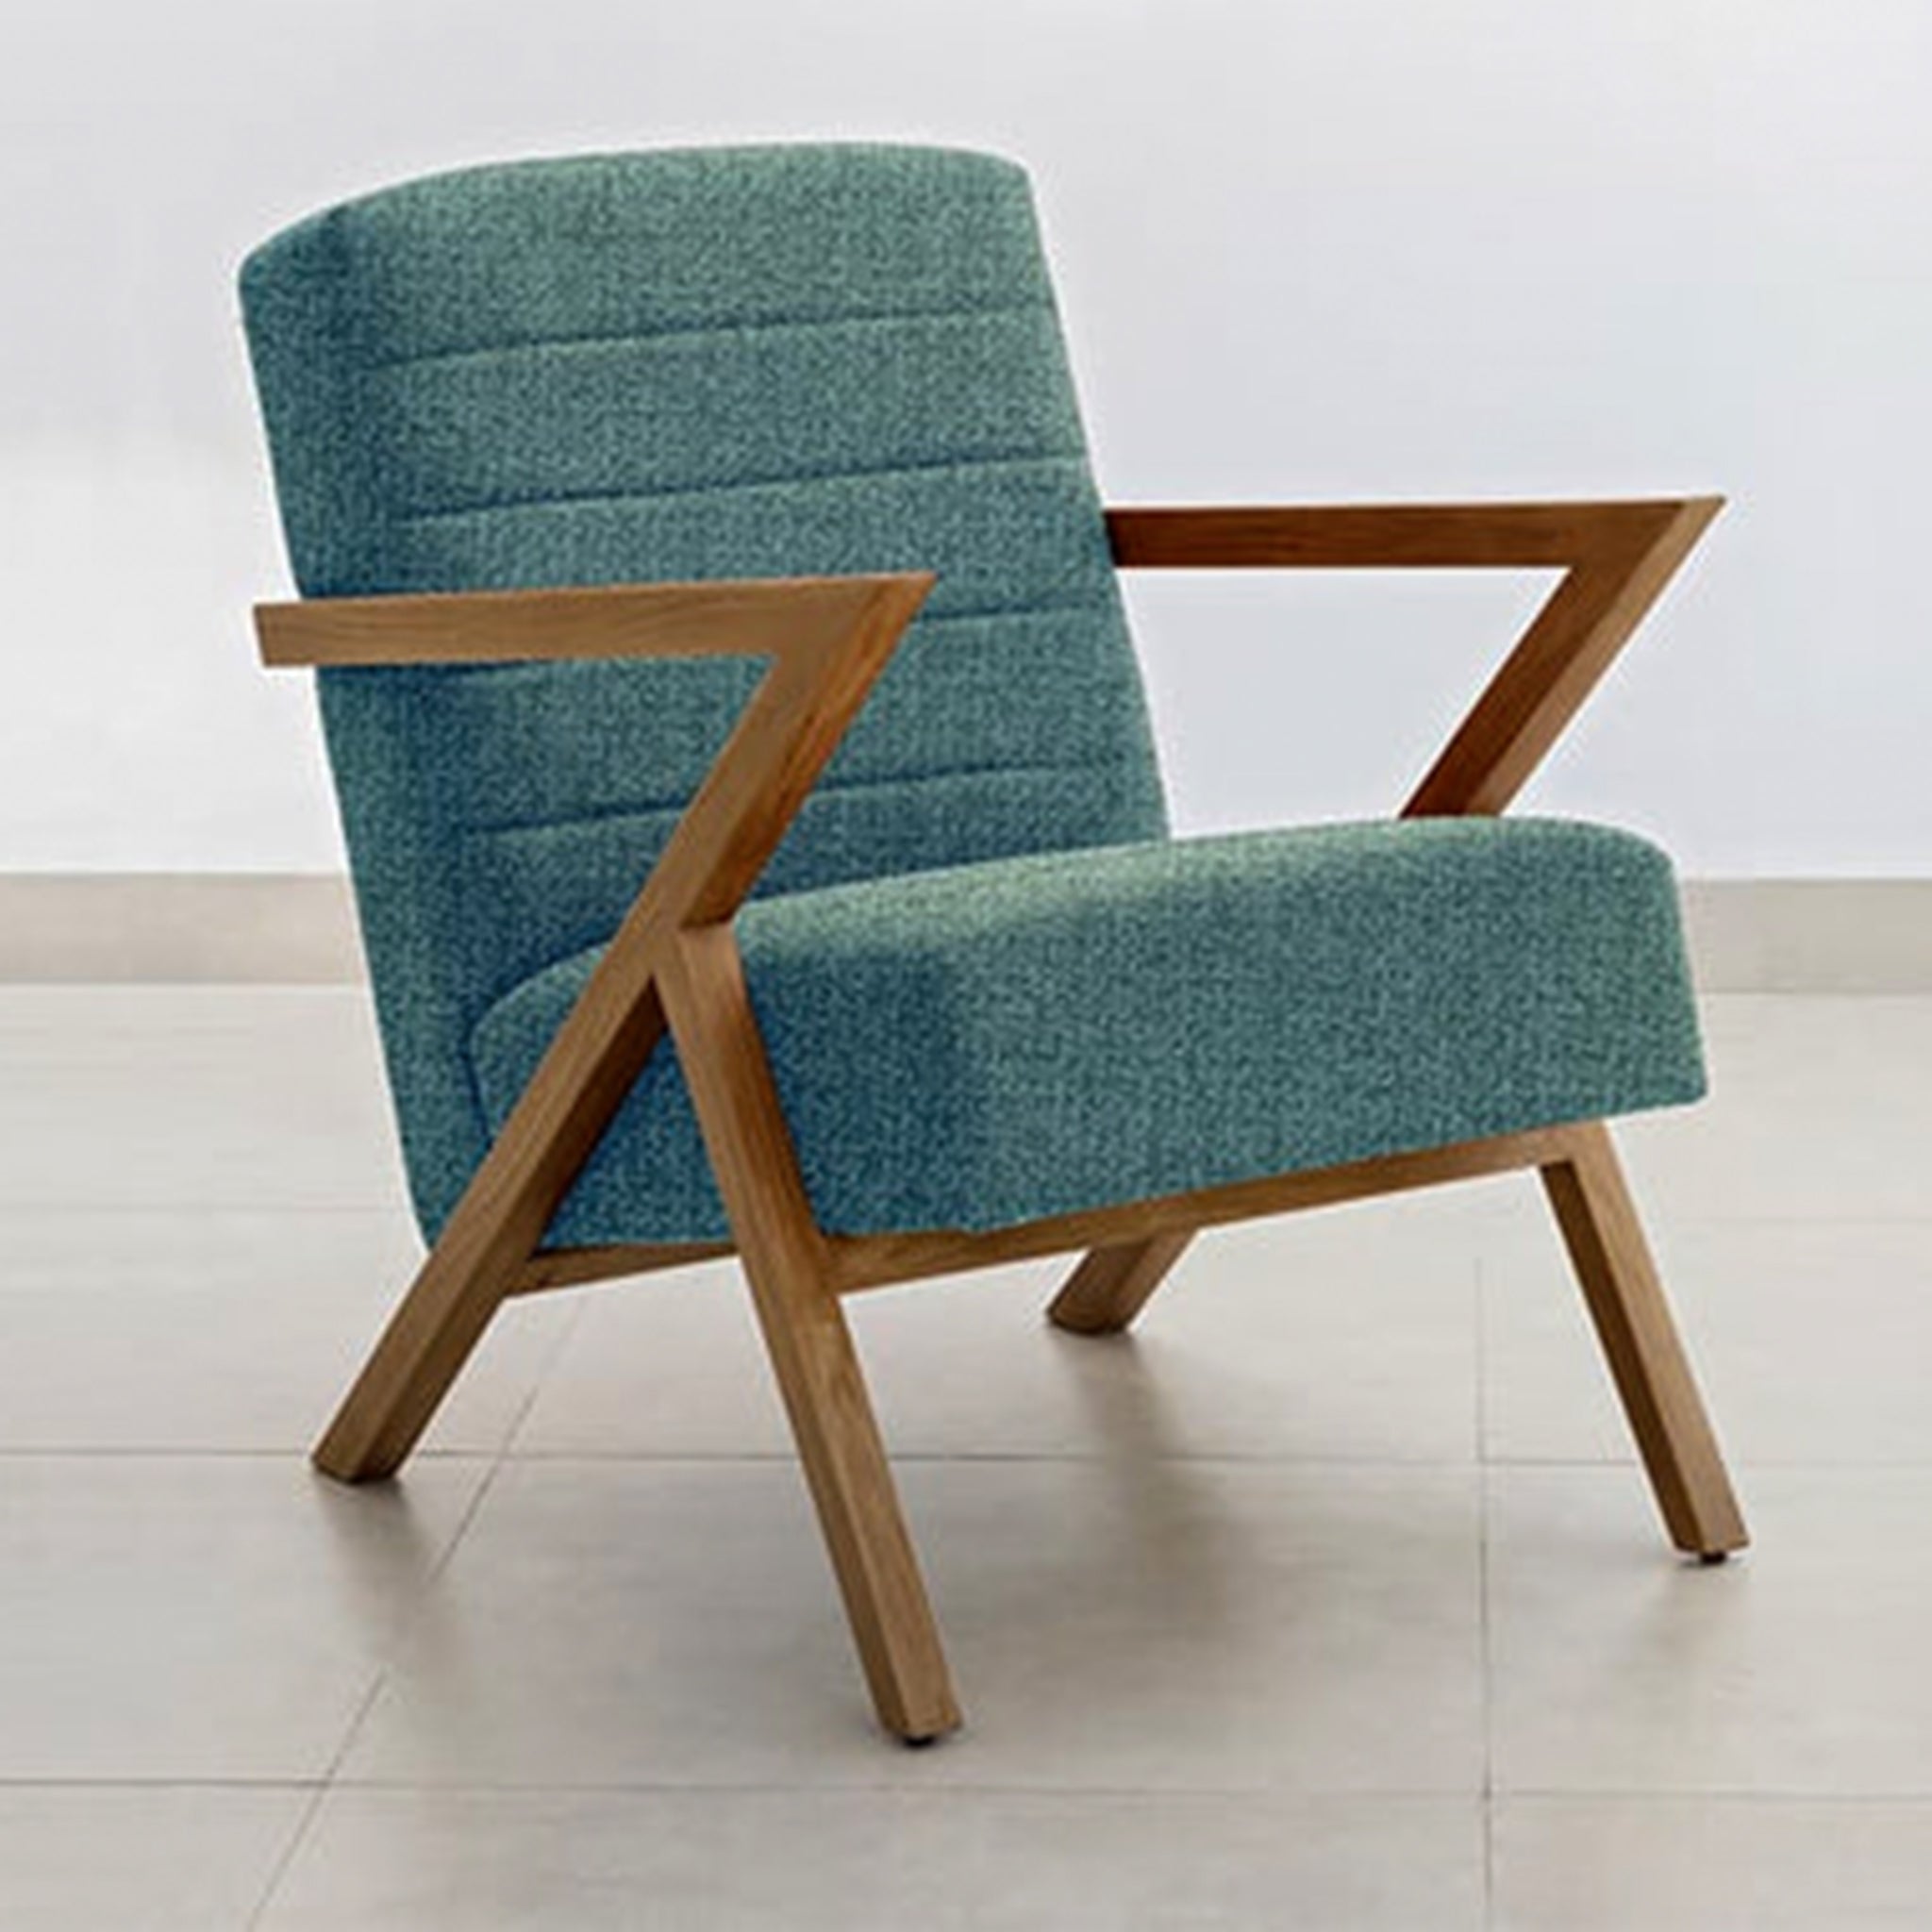 The Stanley chair – a blend of comfort and style